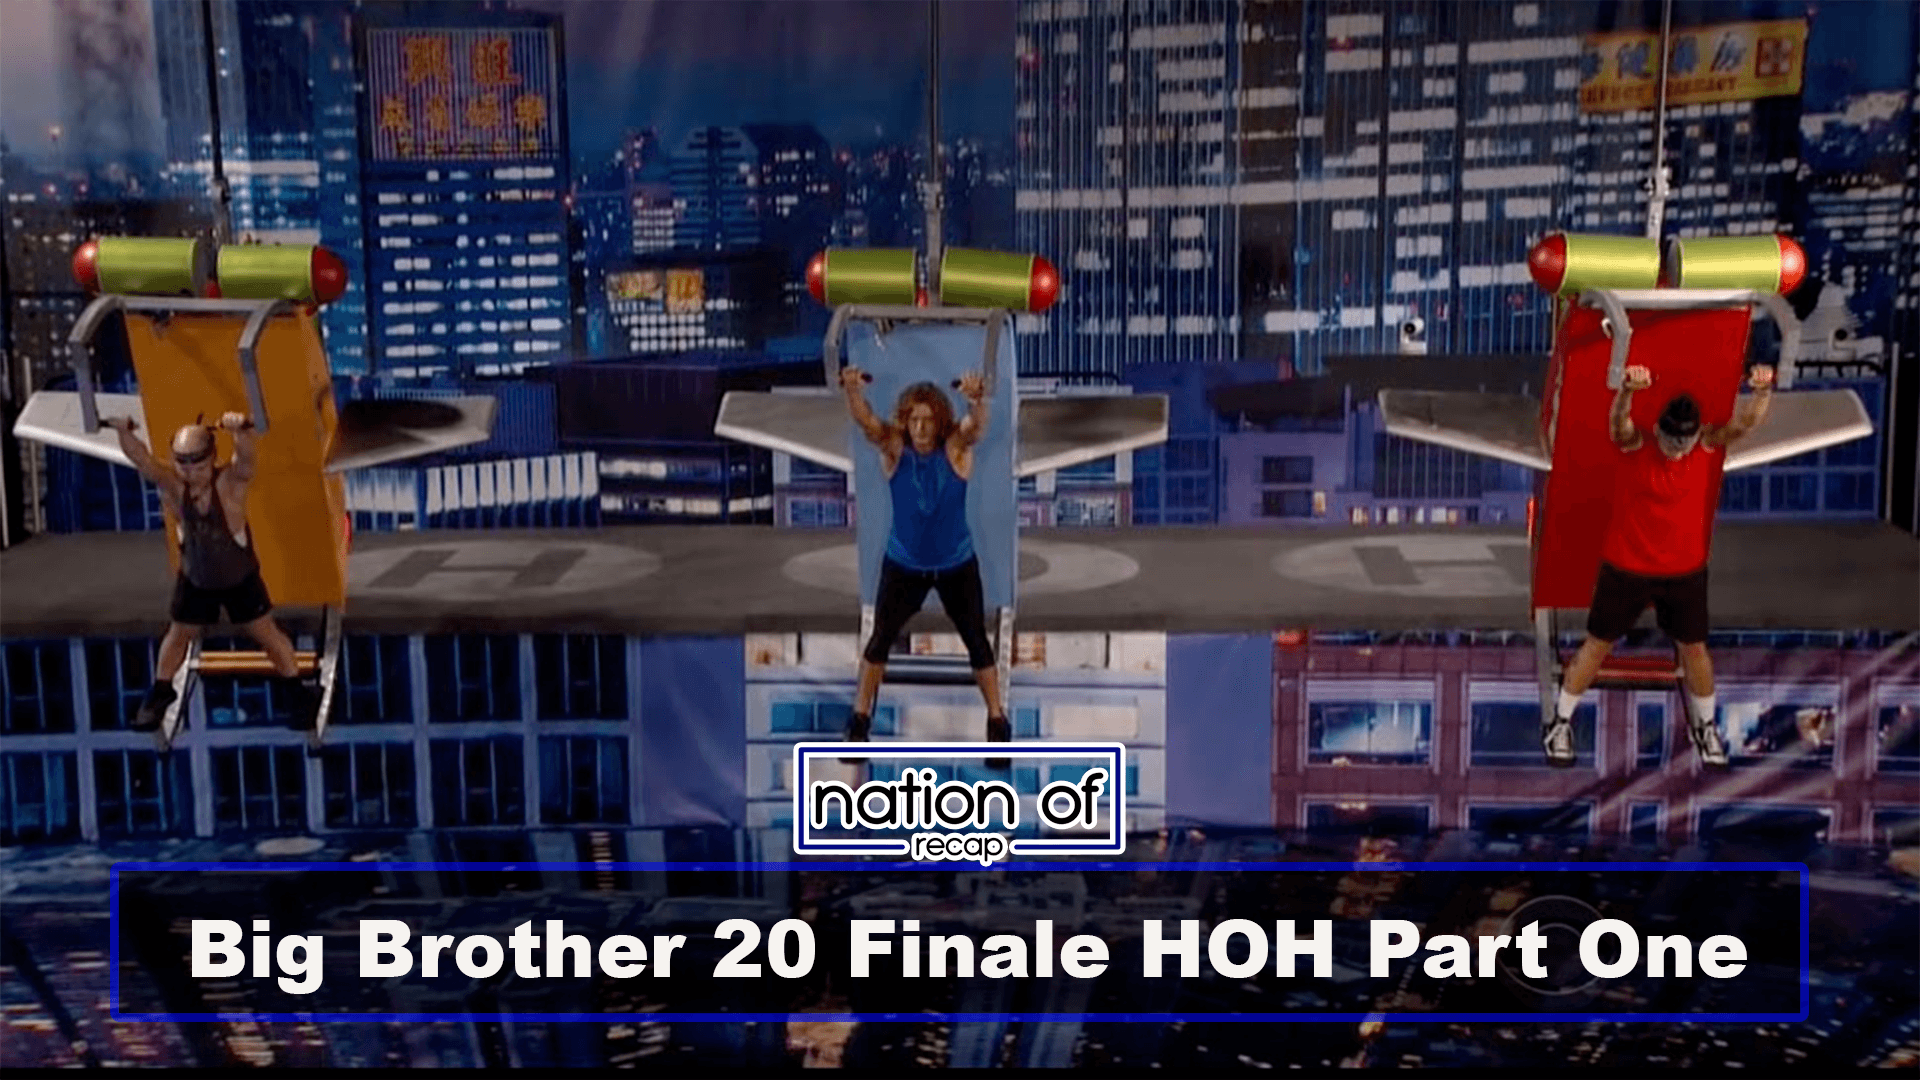 Big Brother 20 Final HOH Part One